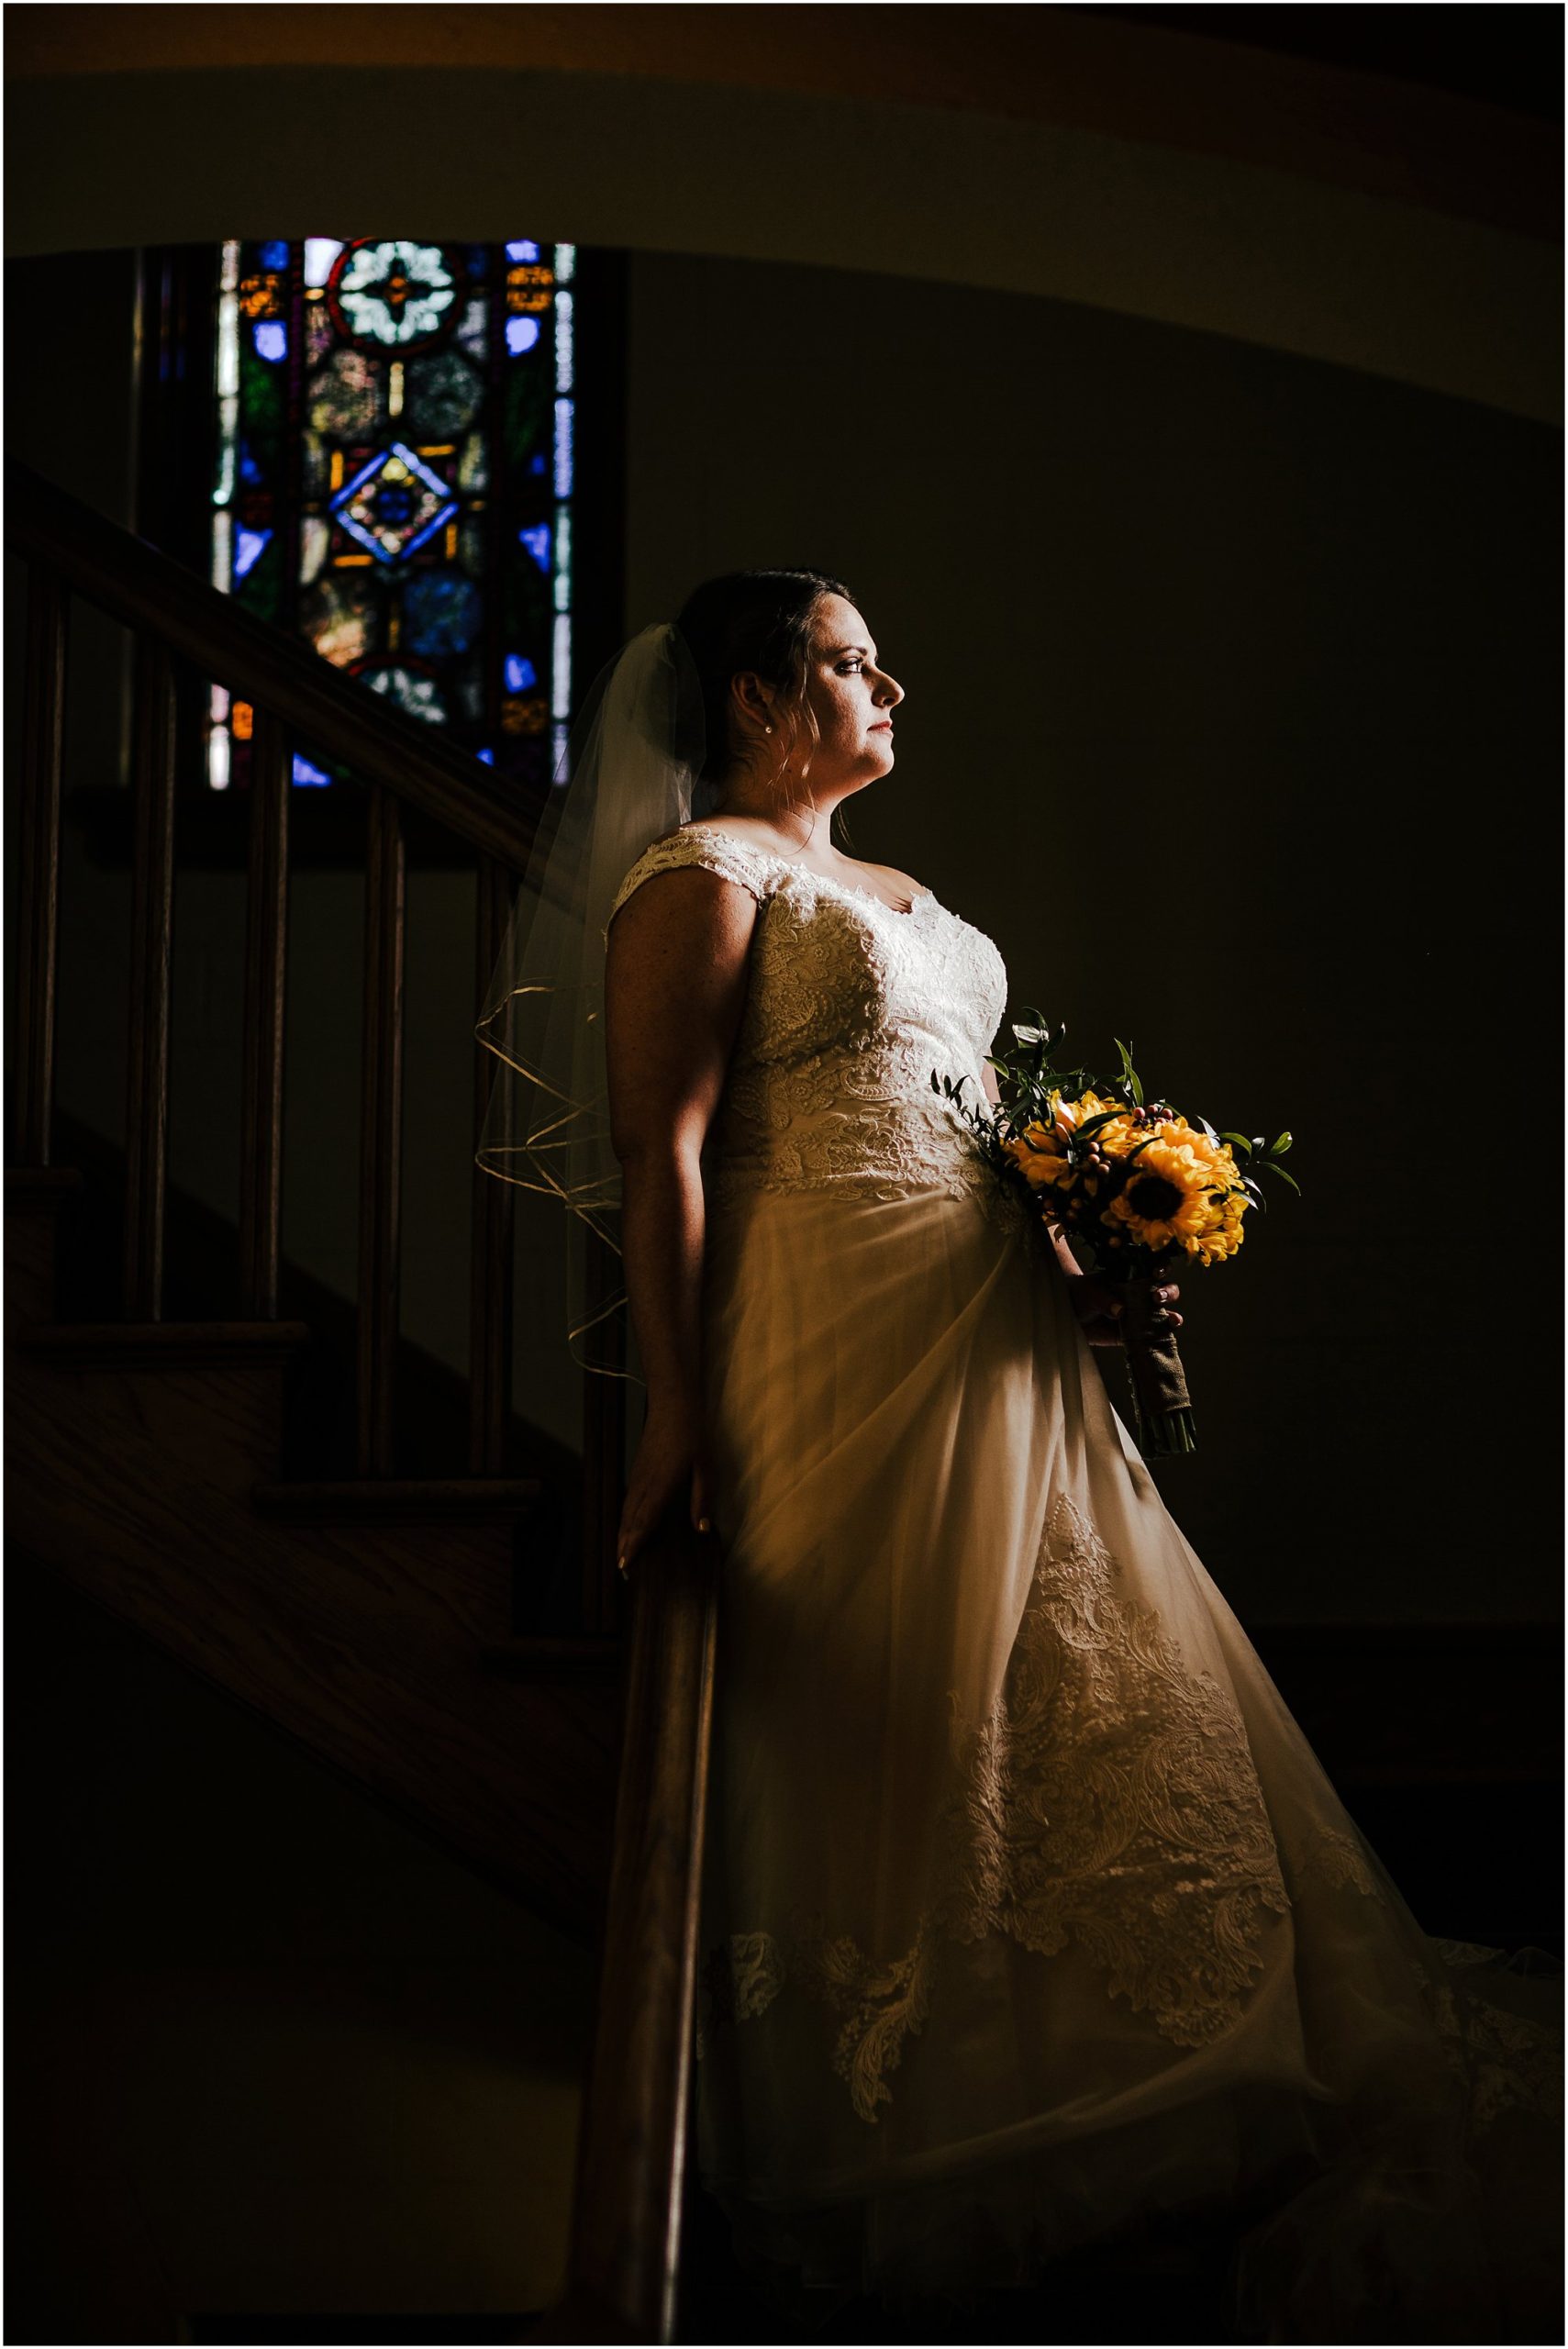 Portrait of bride on church stairs looking out window with stained glass behind her